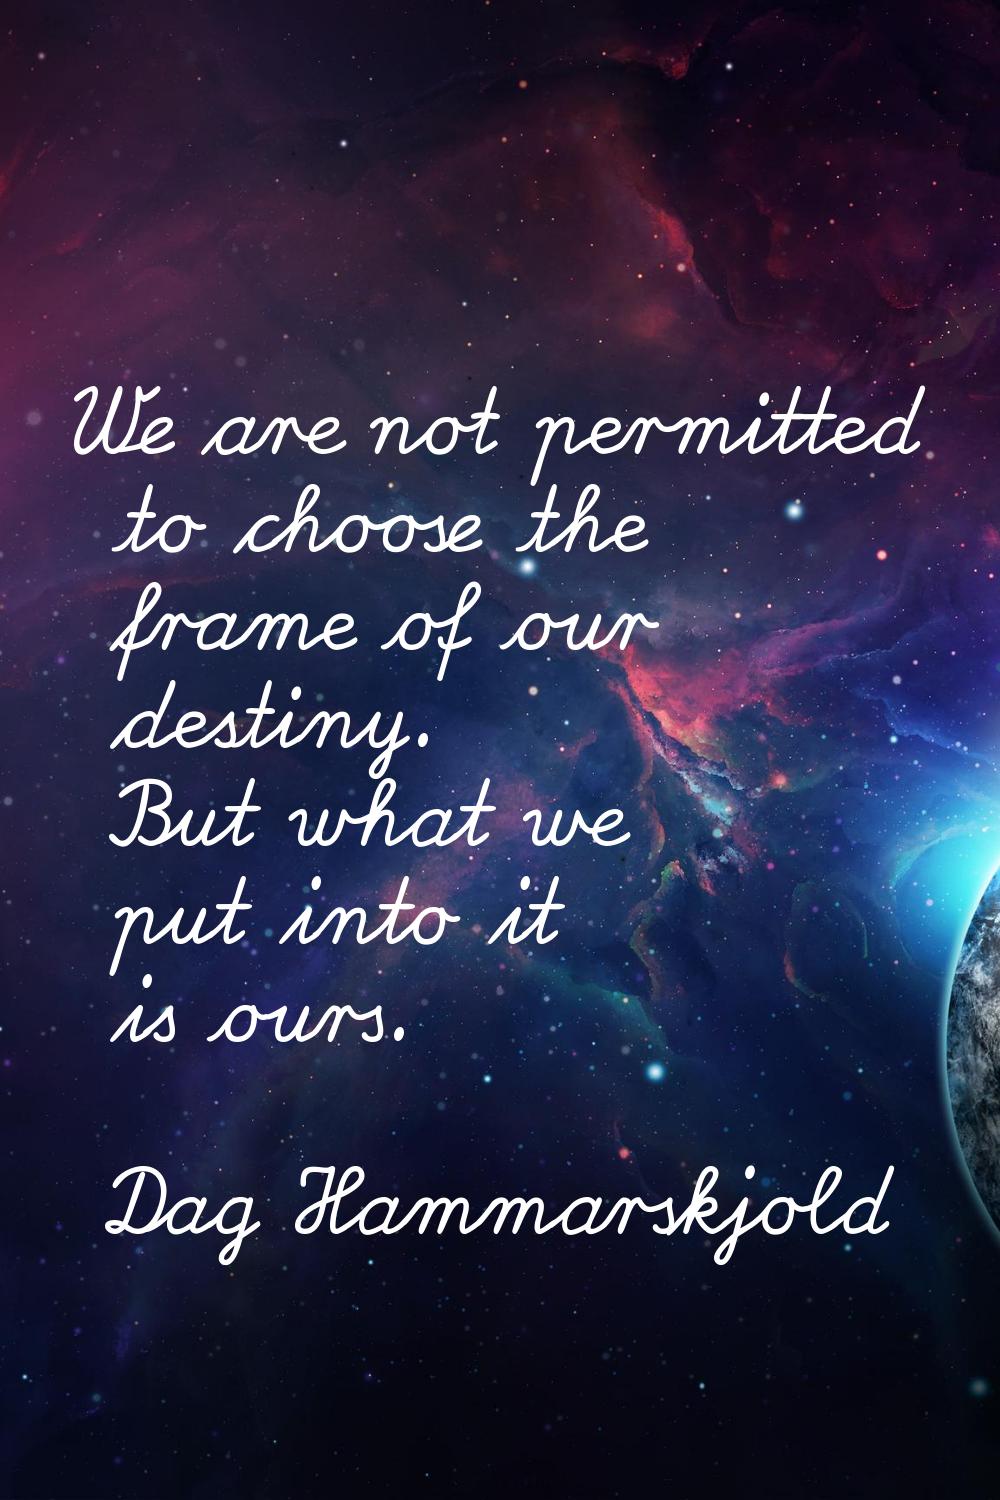 We are not permitted to choose the frame of our destiny. But what we put into it is ours.